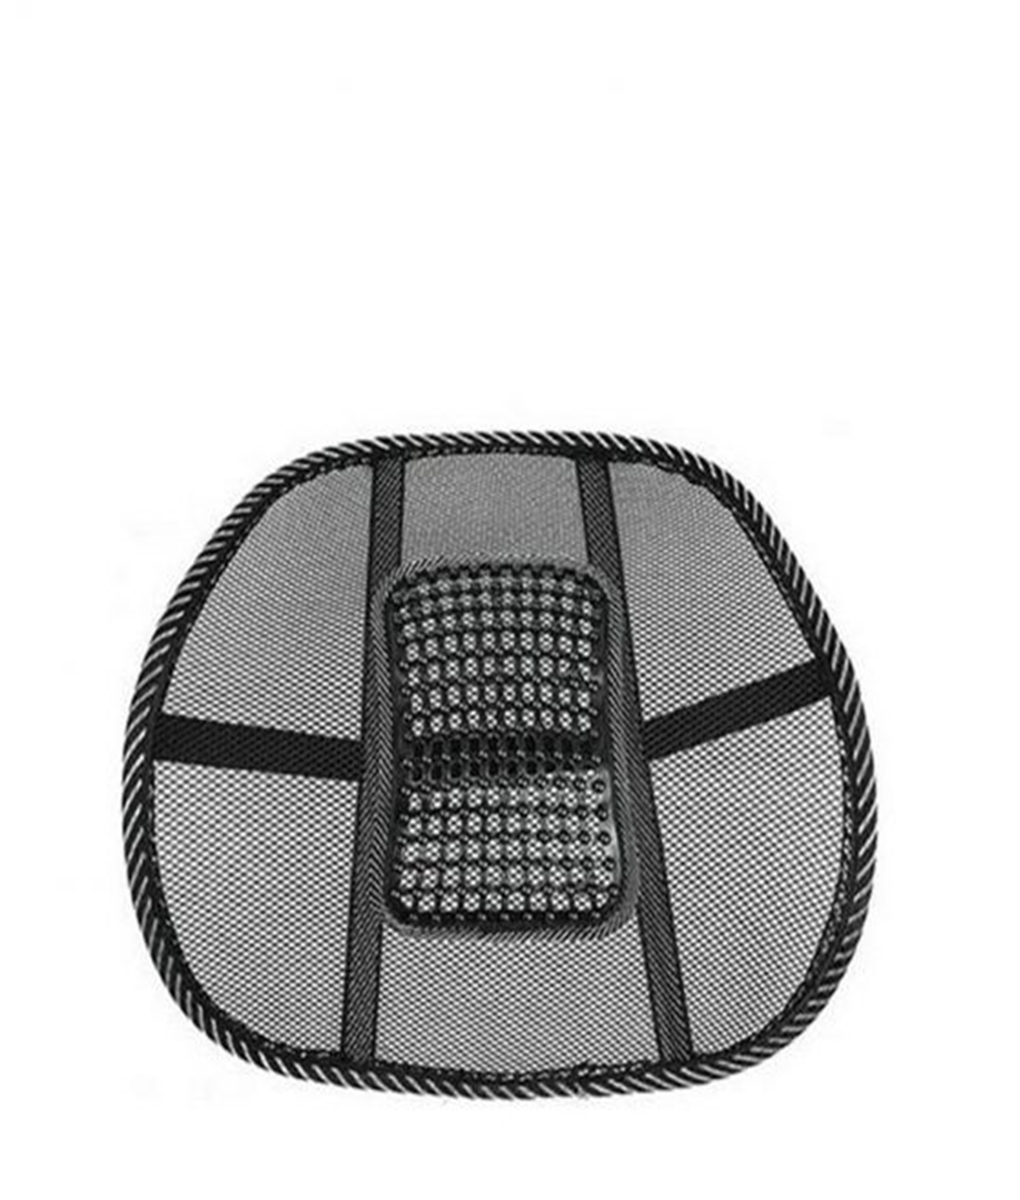 Cool Vent Cushion Mesh Back Lumbar Support New Car Office Chair Truck Seat  Black